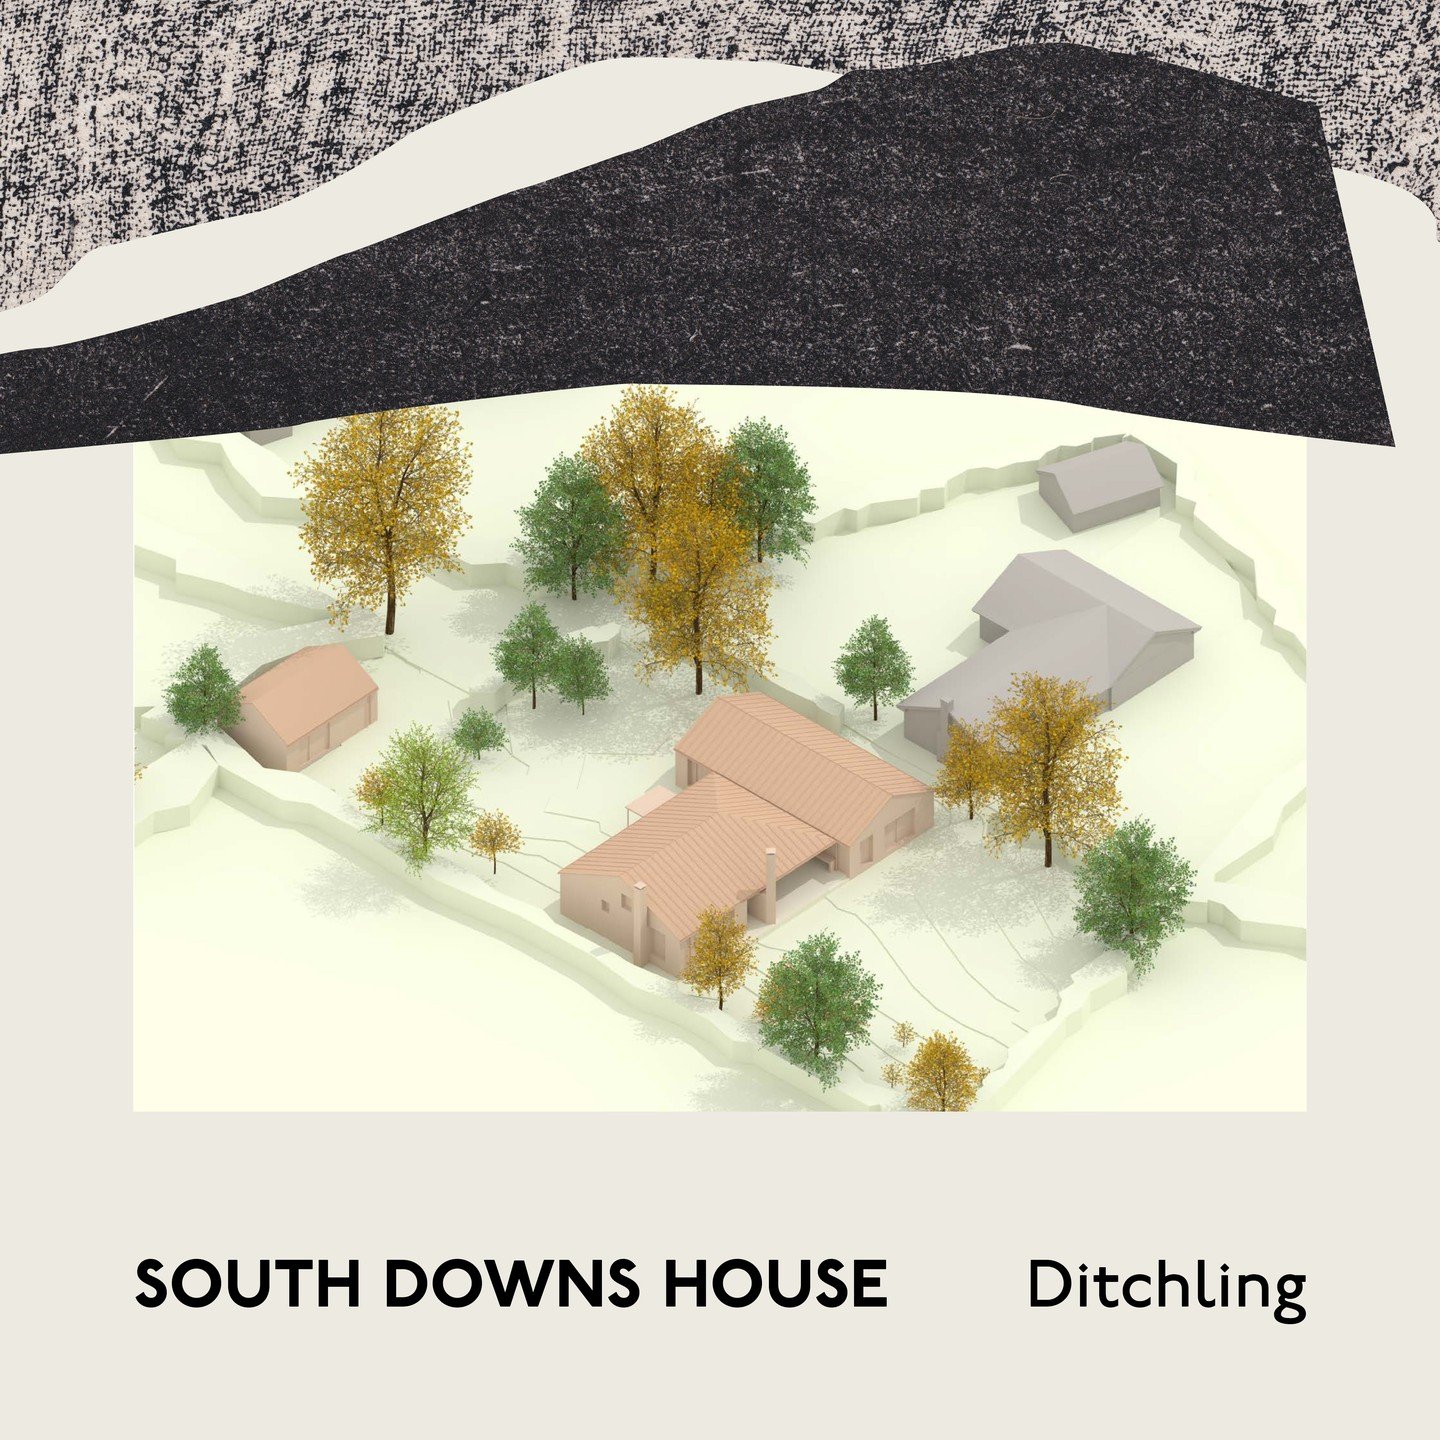 We are excited to share the journey of transforming a 1970s bungalow into a contemporary family home nestled within the stunning landscape of the South Downs National Park!

The clients&rsquo; brief was to explore the options for extending or replaci